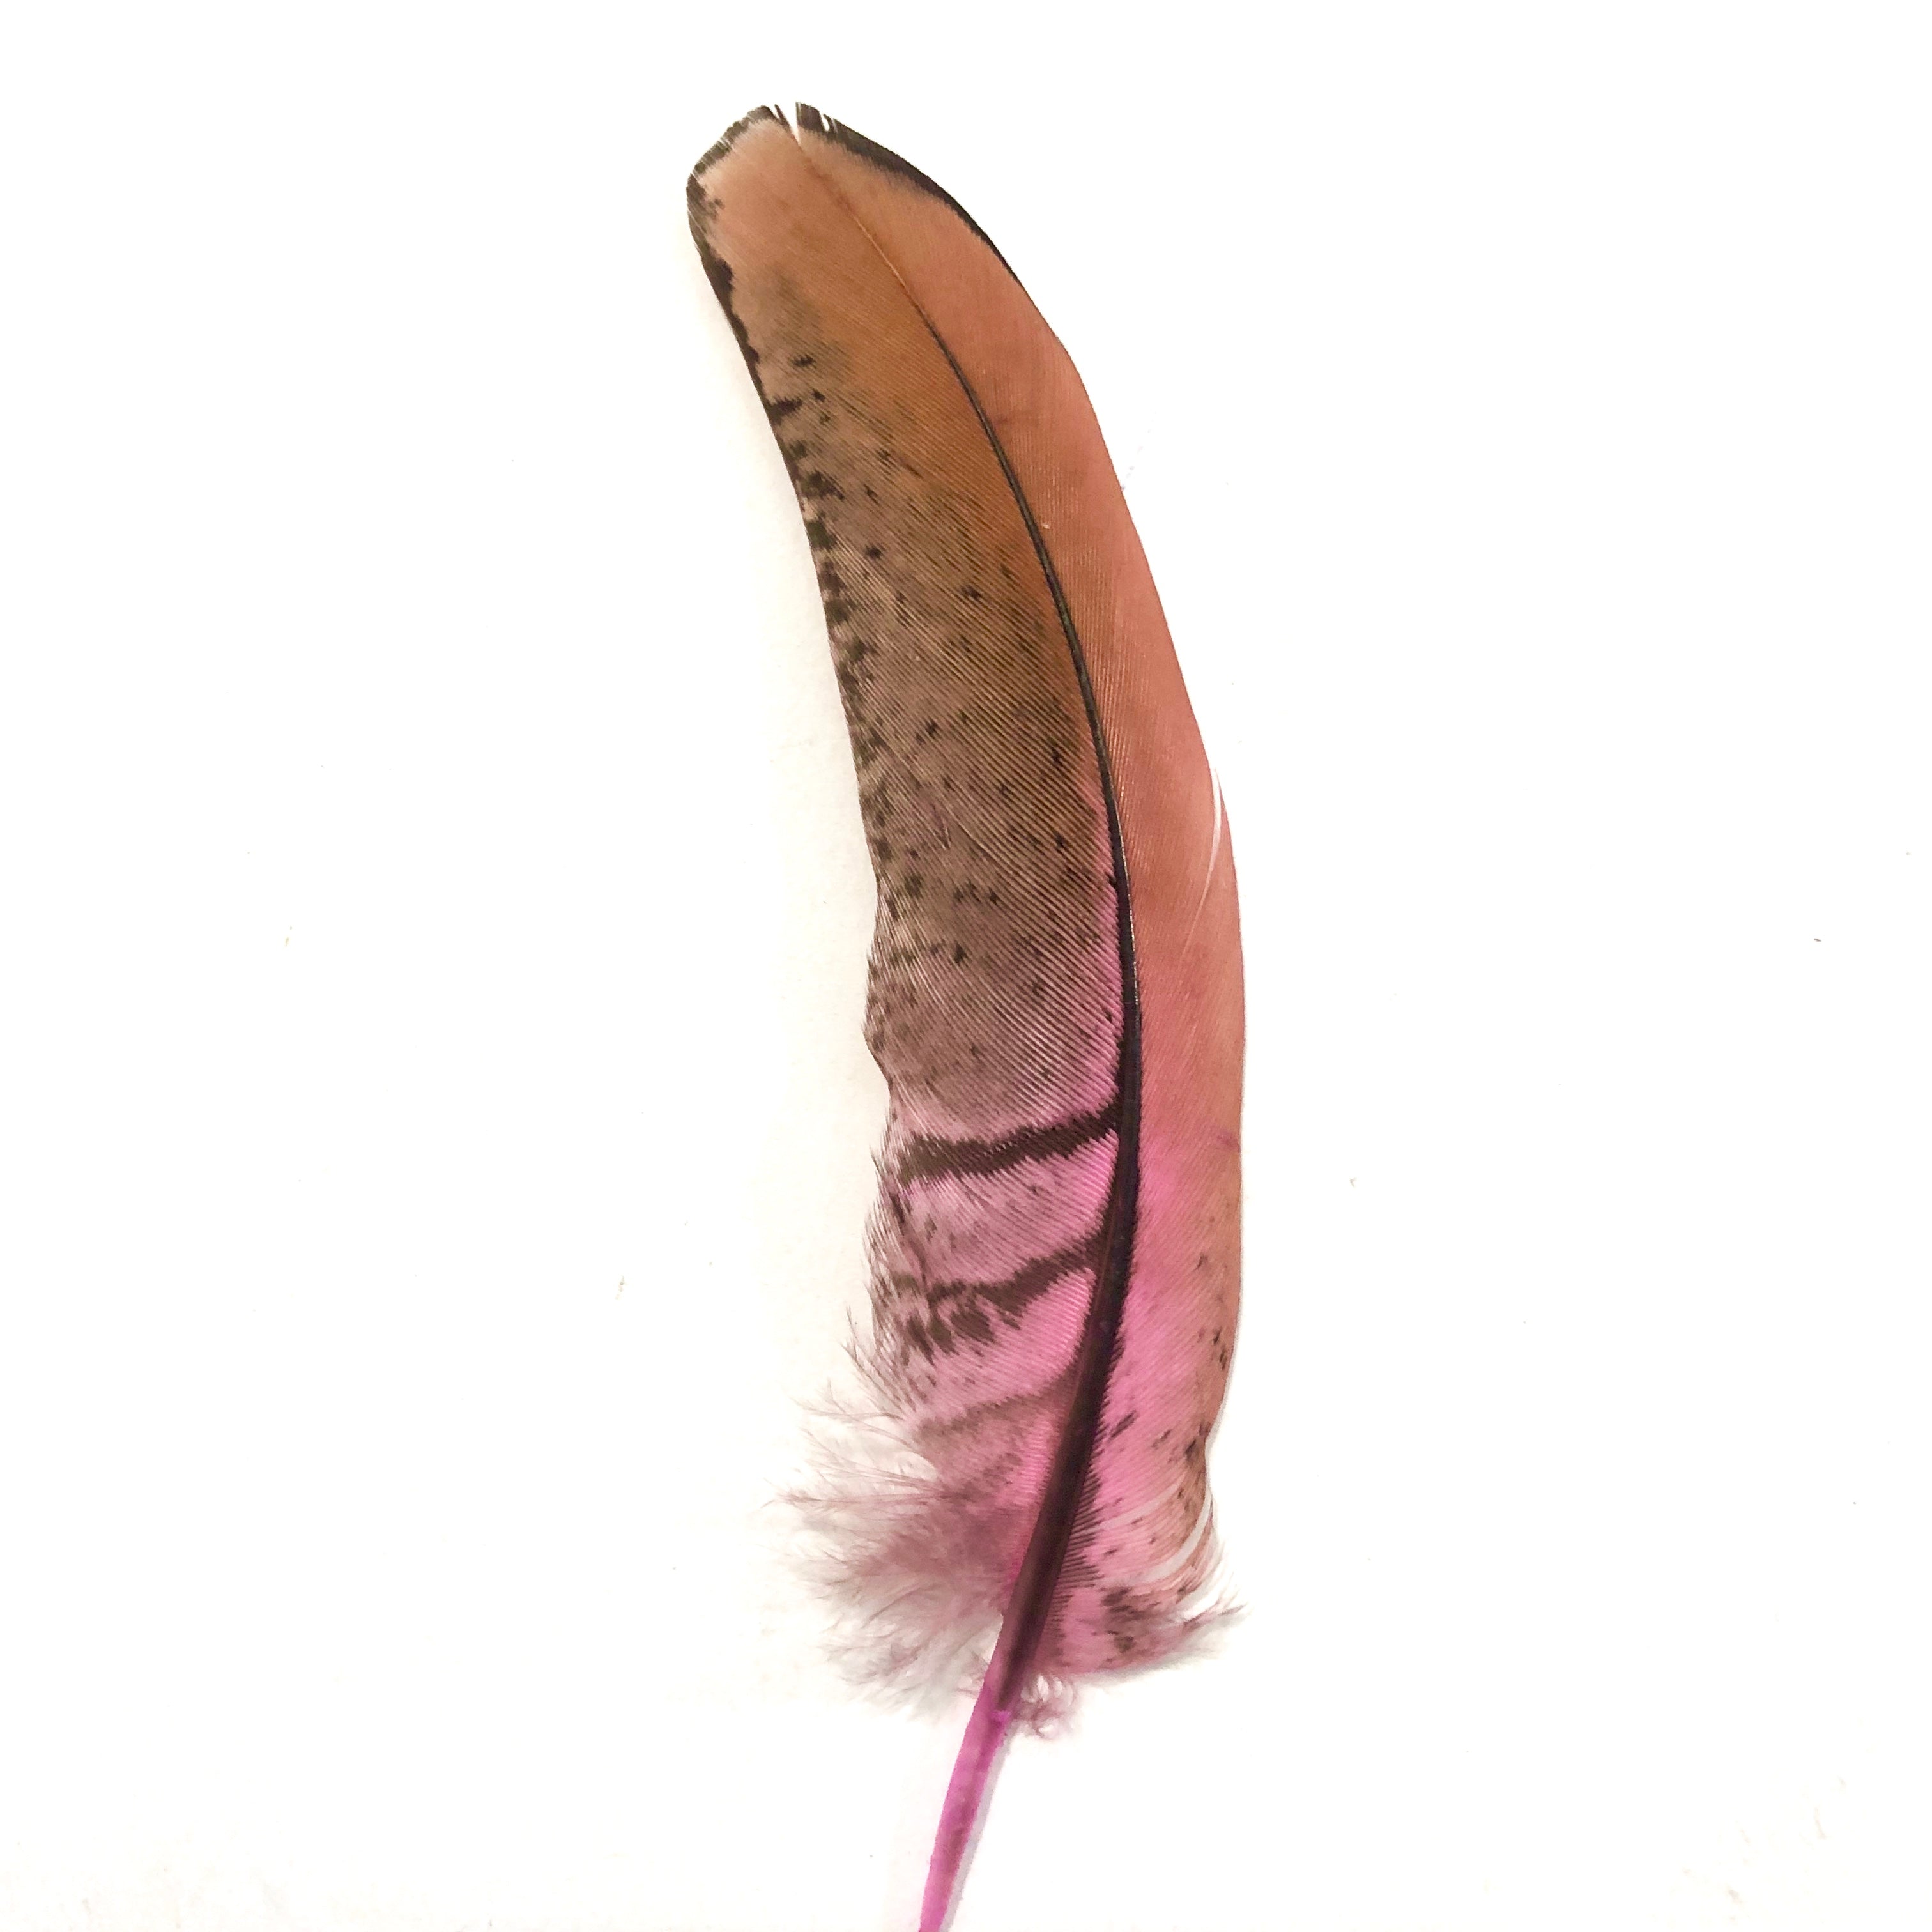 Under 6" Reeves Pheasant Tail Feather x 10 pcs - Pink